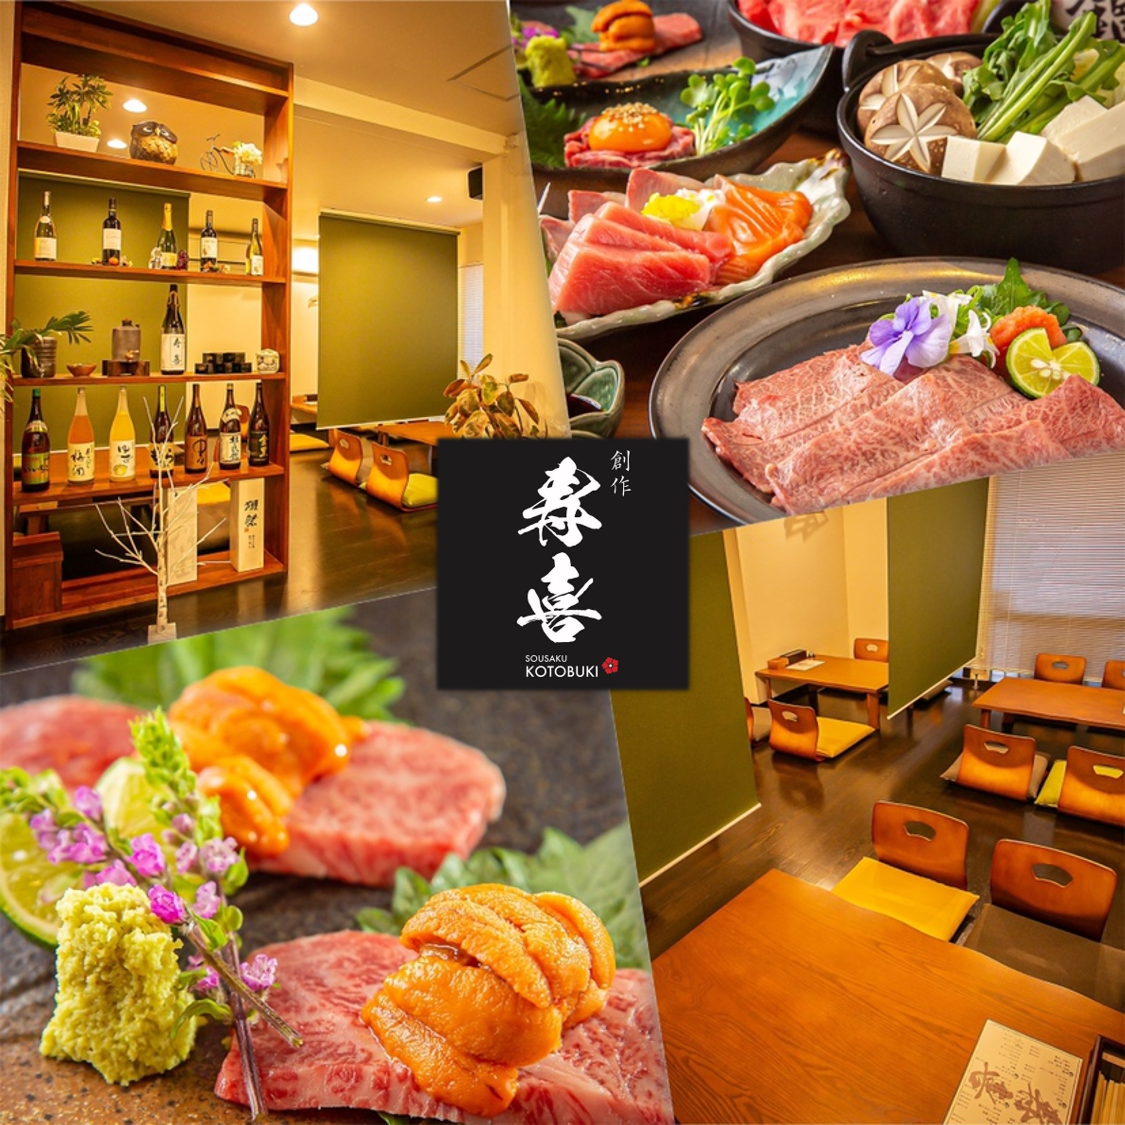 Appeared in Minami Kusatsu! Dining with creative dishes that you can enjoy with your eyes and tongue in a calm atmosphere ◎